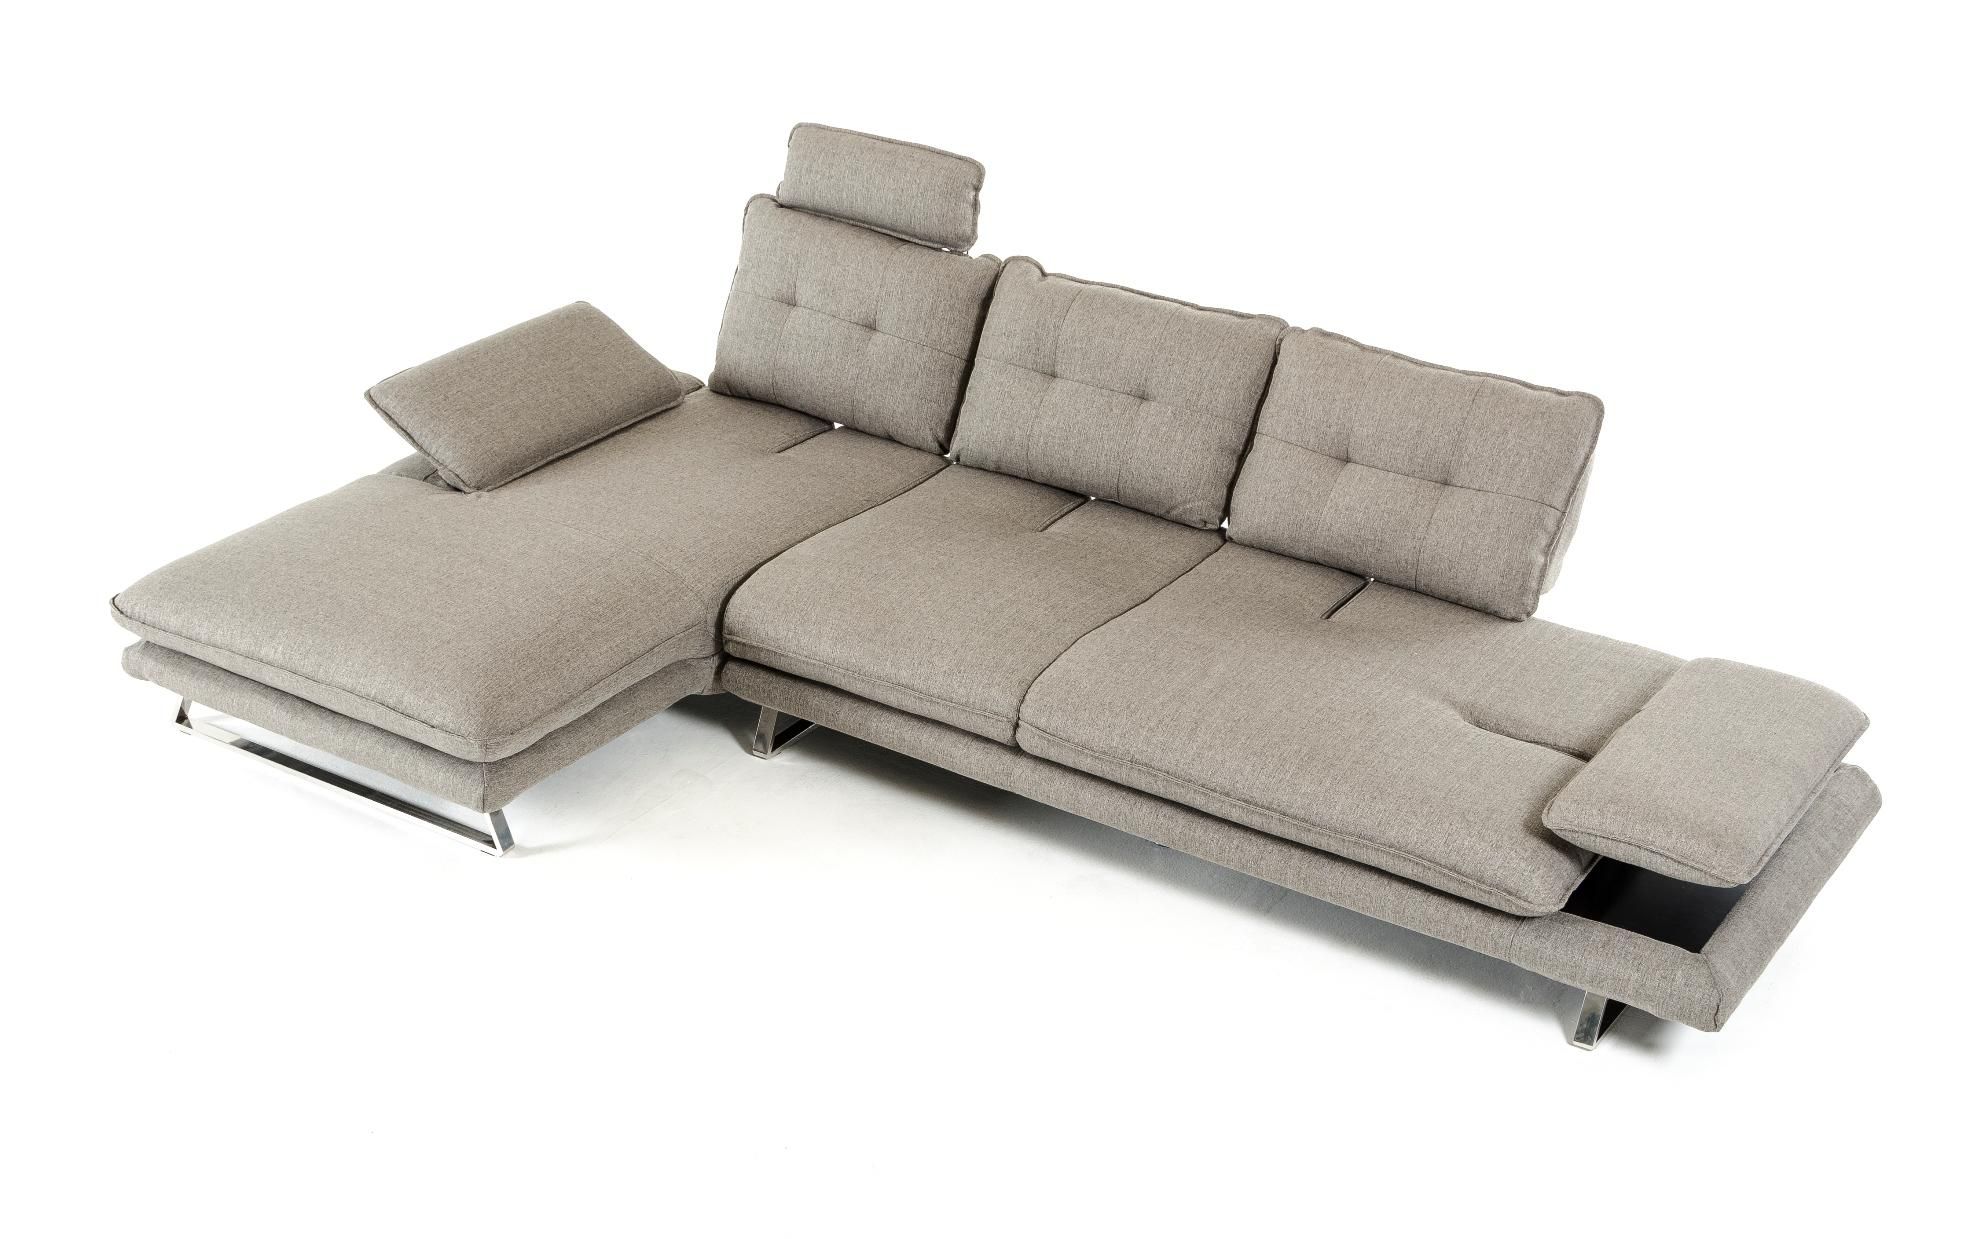 Grey Fabric Tufted Sectional Sofa Vig Divani Casa Porter With Regard To 2pc Connel Modern Chaise Sectional Sofas Black (View 15 of 15)